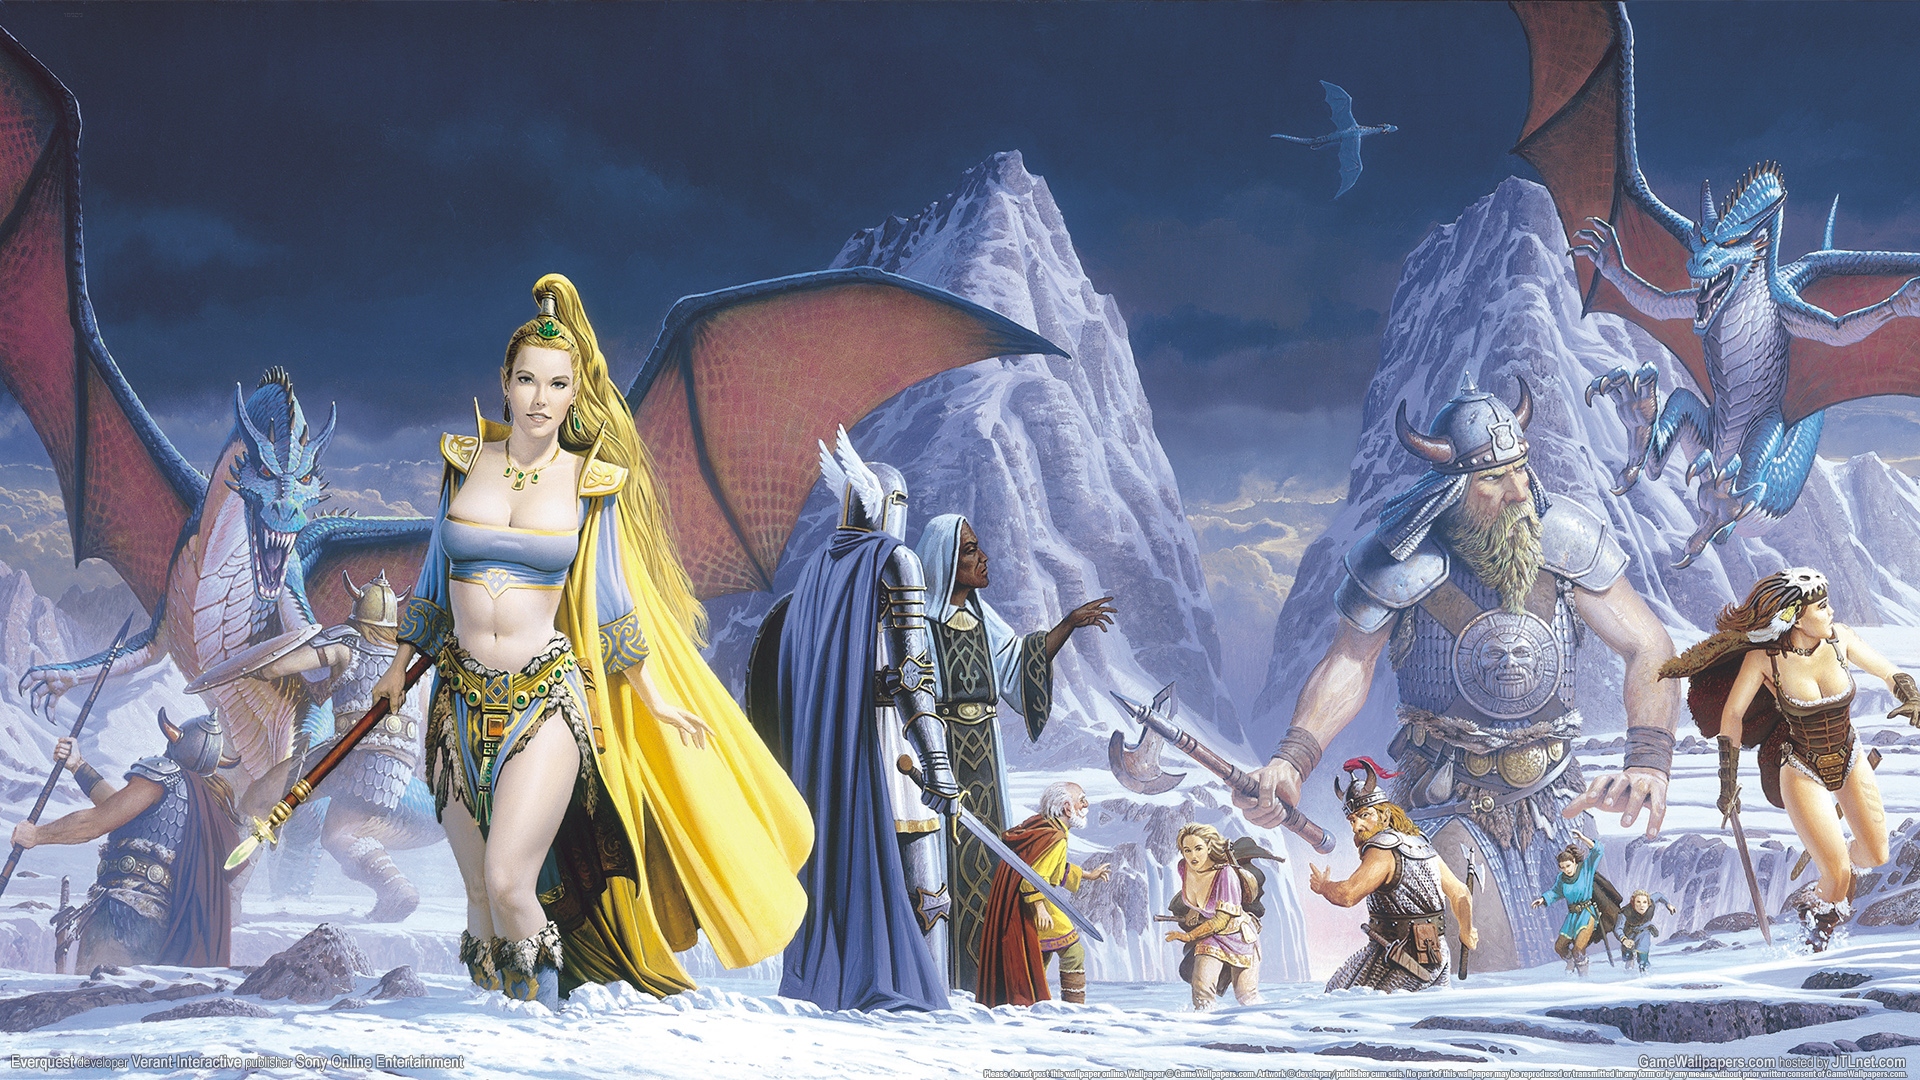 Everquest 1920x1080 wallpaper or background 07